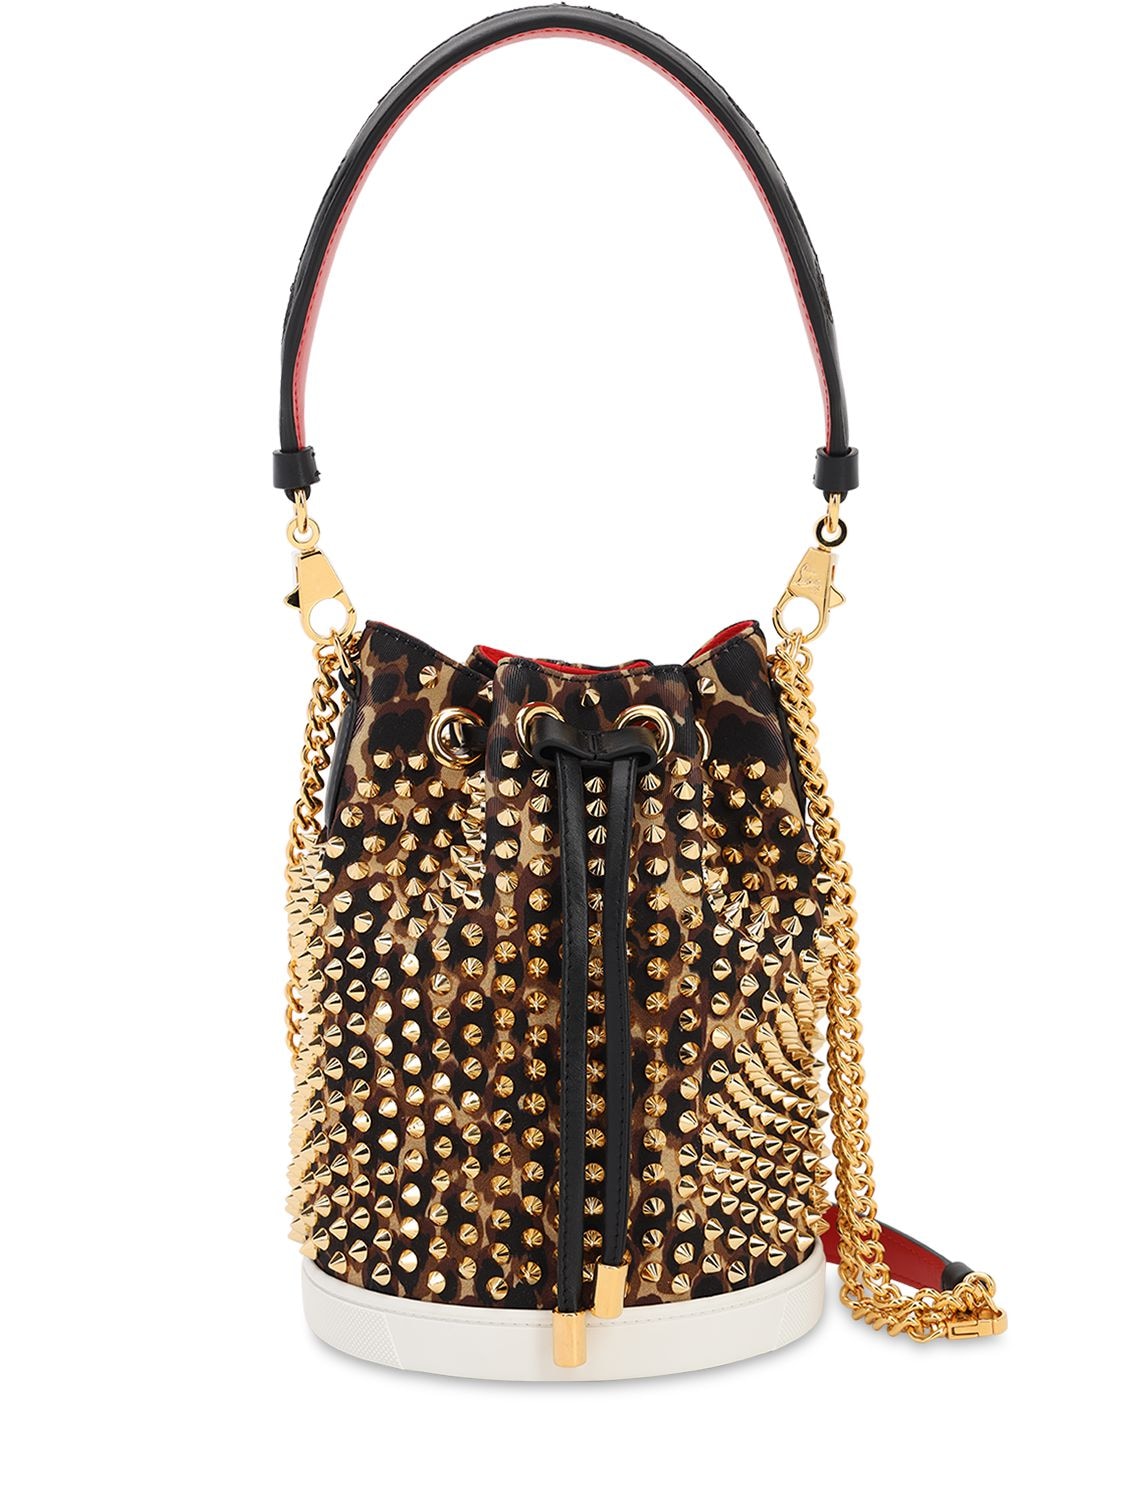 Christian Louboutin Mary Jane Studded Bucket Bag In Multicolor